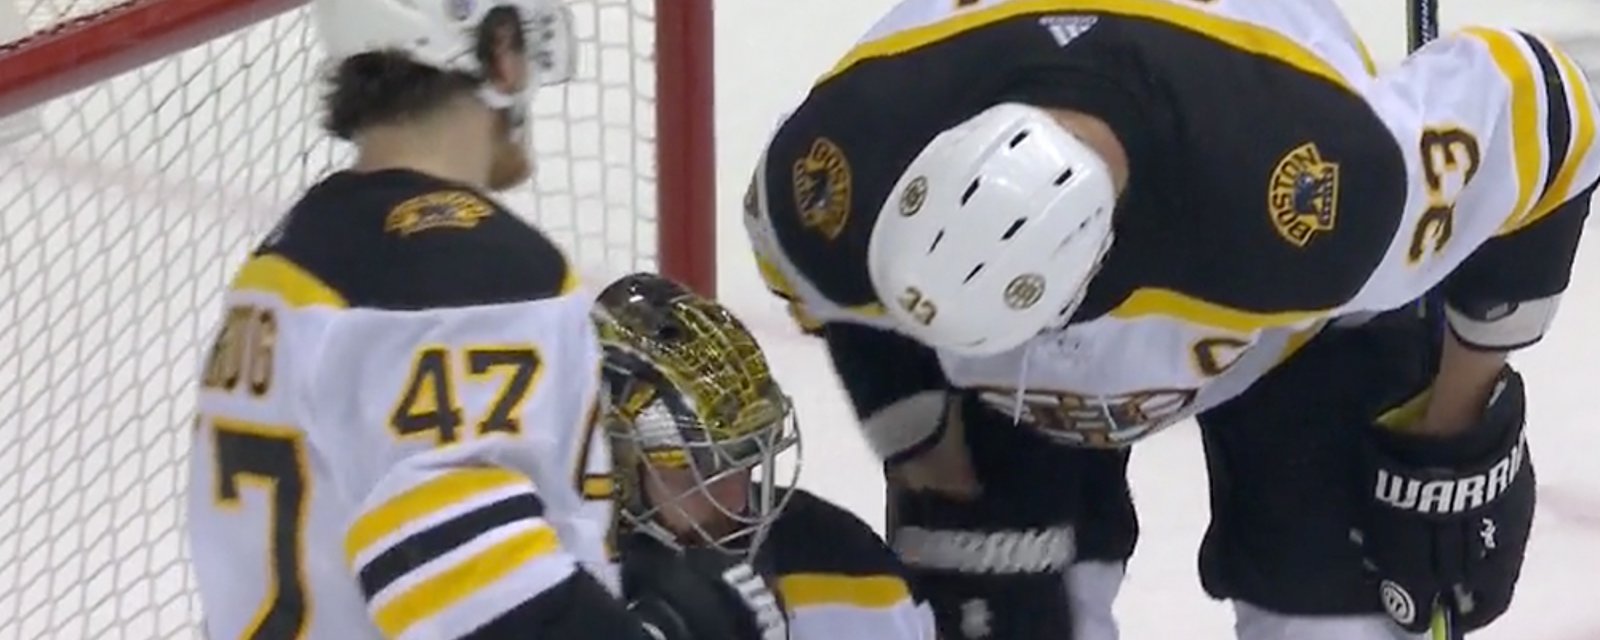 The Bruins have officially been eliminated from the Stanley Cup Playoffs